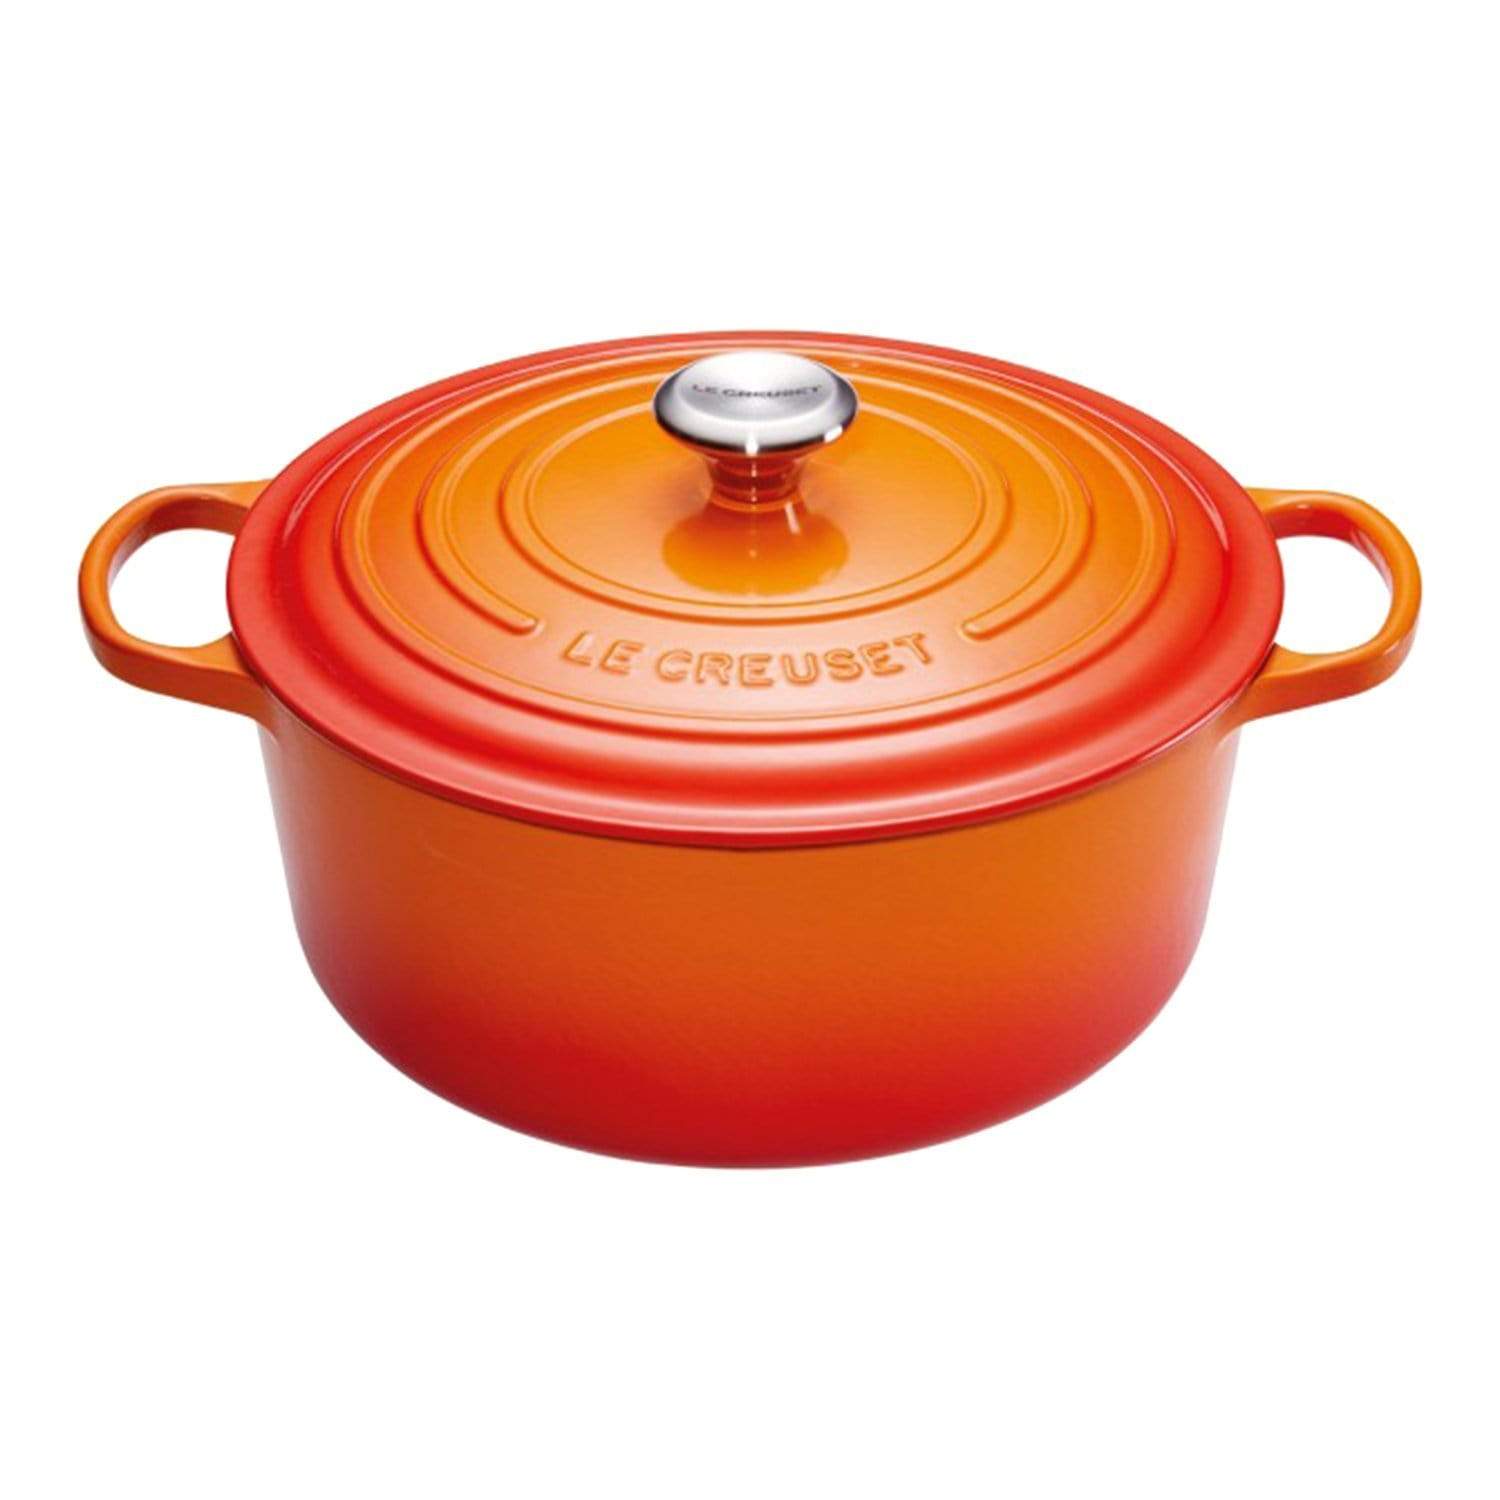 Le Creuset Round French Oven Casserole - Flame, 26 cm - 21177260902430 - Jashanmal Home